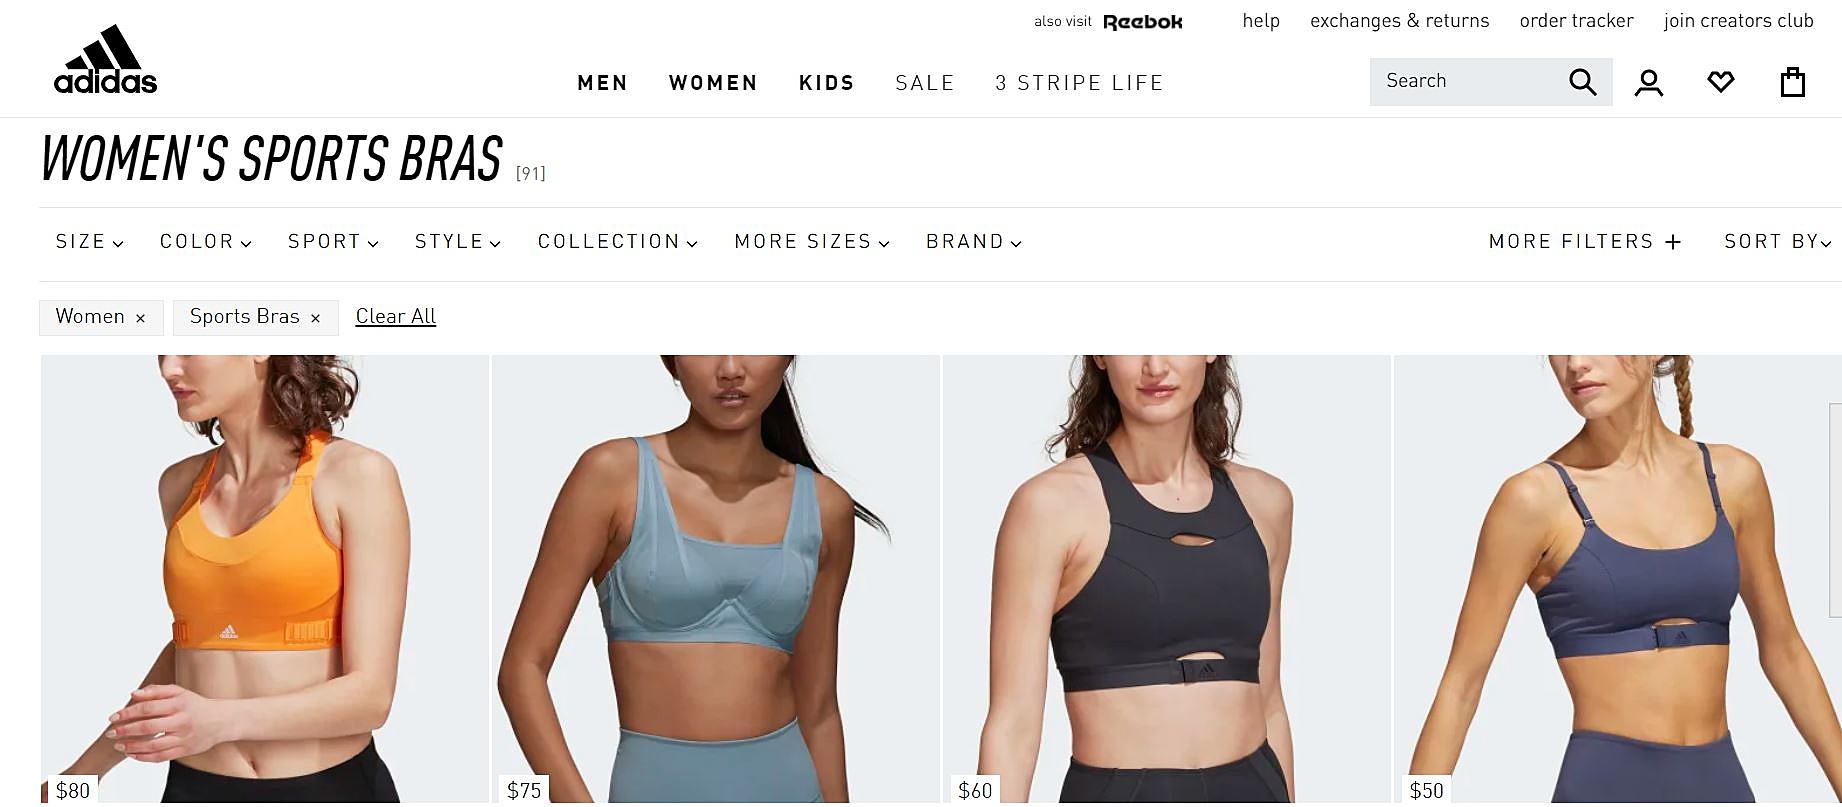 Adidas bra advert has no bras on show as it opts for bare breasts instead -  Cornwall Live